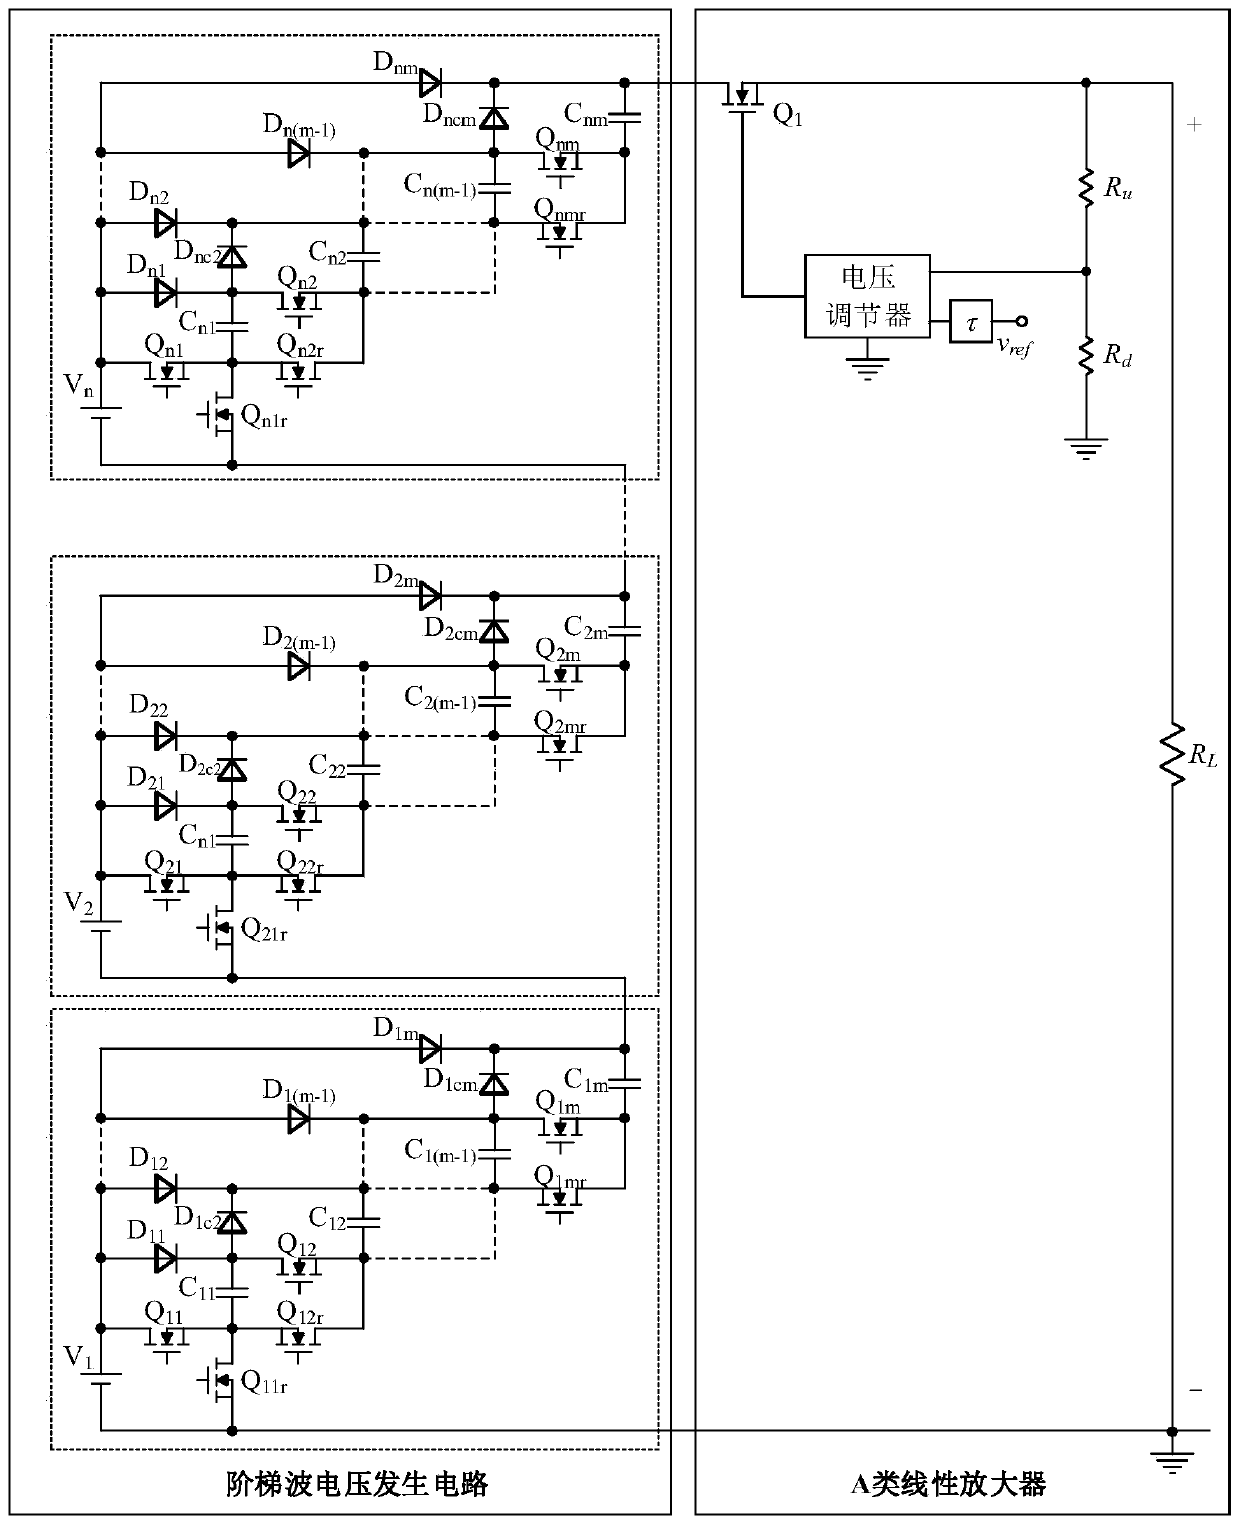 A switched capacitor high bandwidth envelope tracking power supply circuit and its control method